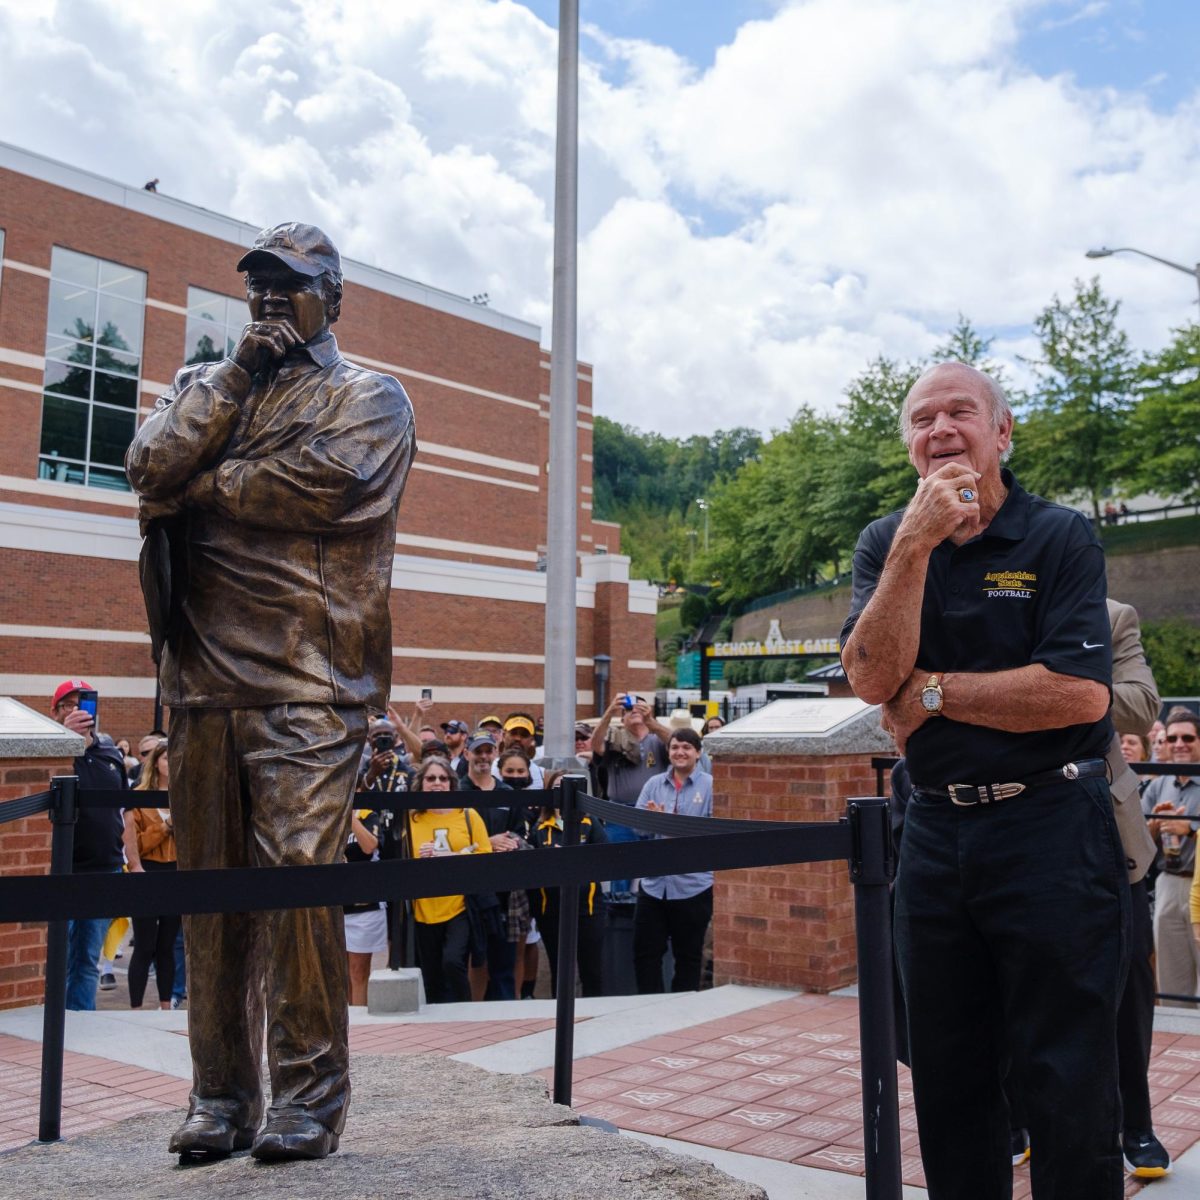 Jerry Moore matches his statue’s pose during the unveiling of the statue and the plaza dedicated to him outside the front of Kidd Brewer Stadium on Sept. 18, 2021. Moore was the head coach of App State football for 24 years where he went 242-134-2 and led the team to three NCAA Division I-AA Football Championships in a row, the first national championships for any North Carolina college football team.